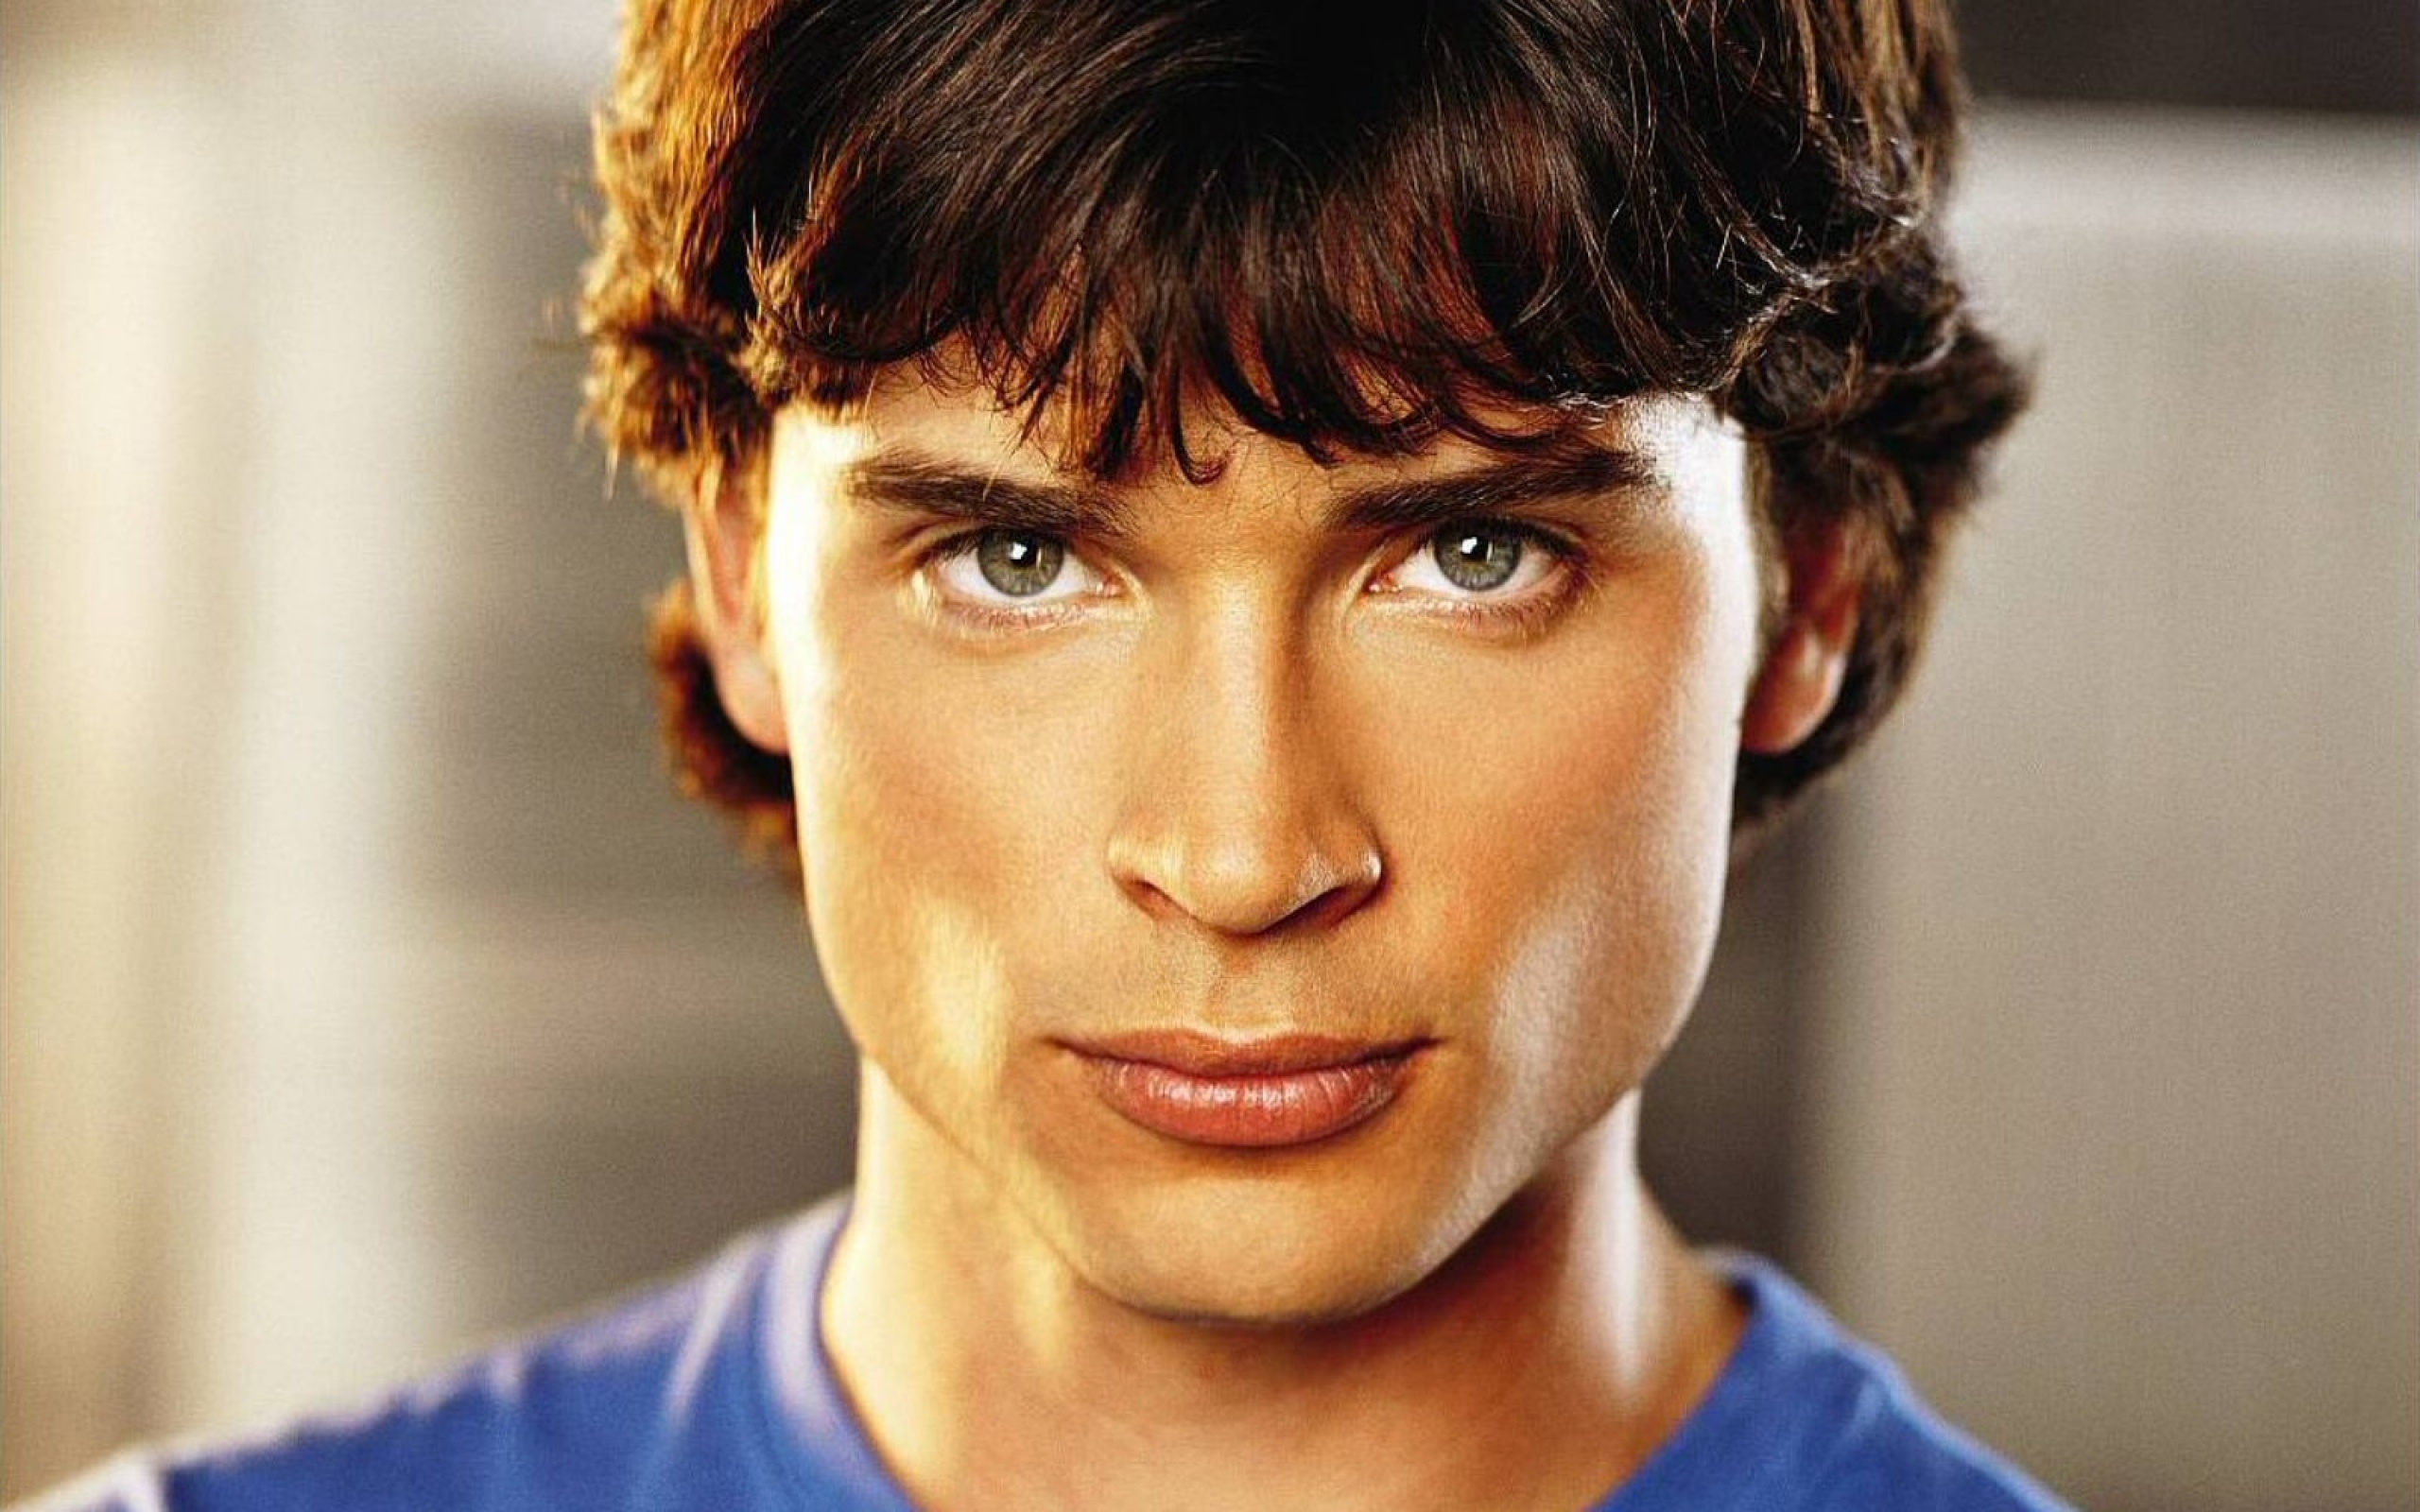 Tom Welling movies, Collection of wallpapers, Diverse images, Striking visuals, 2560x1600 HD Desktop